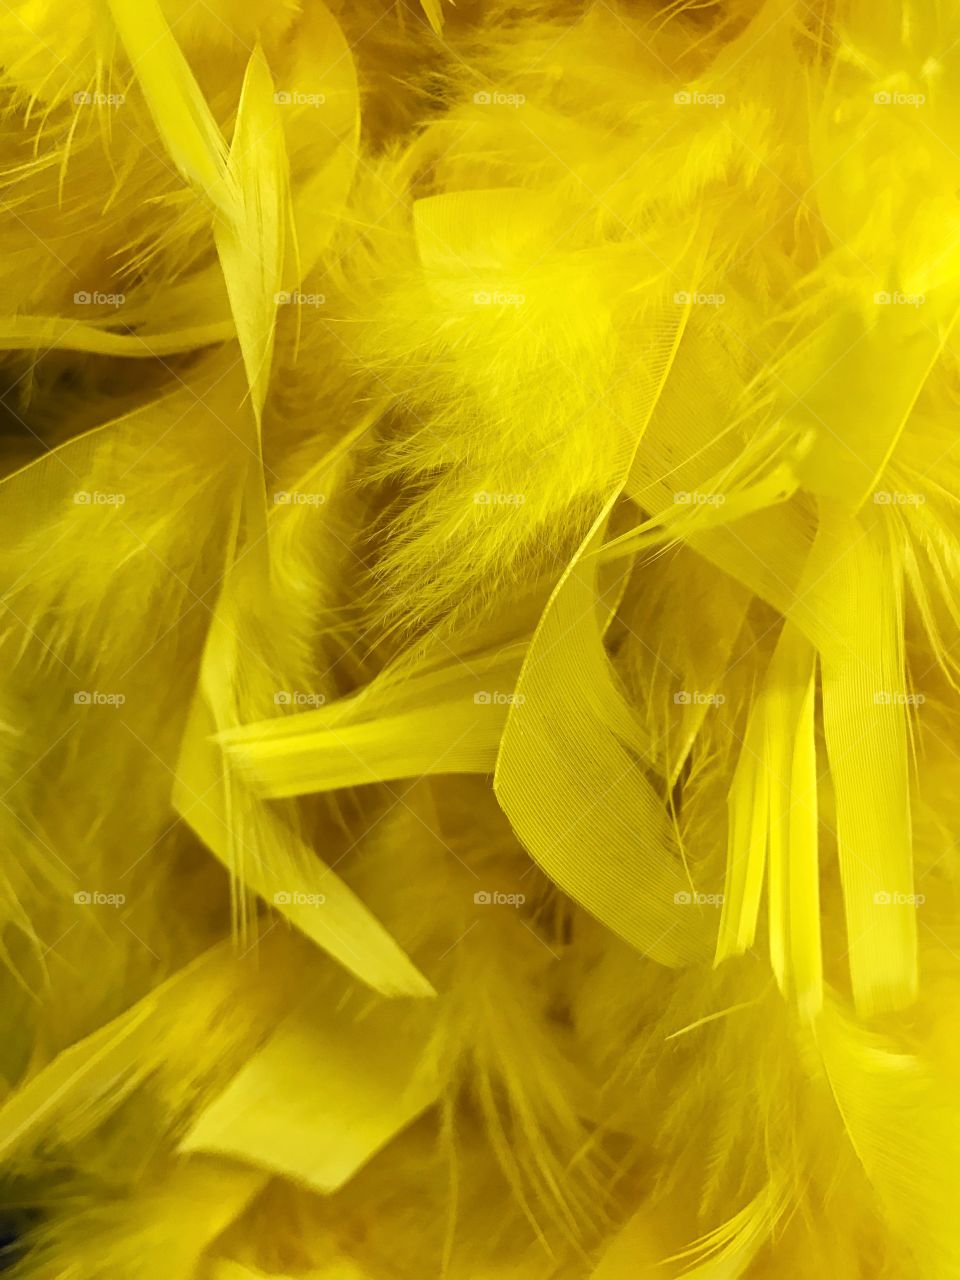 Extreme close-up of feathers